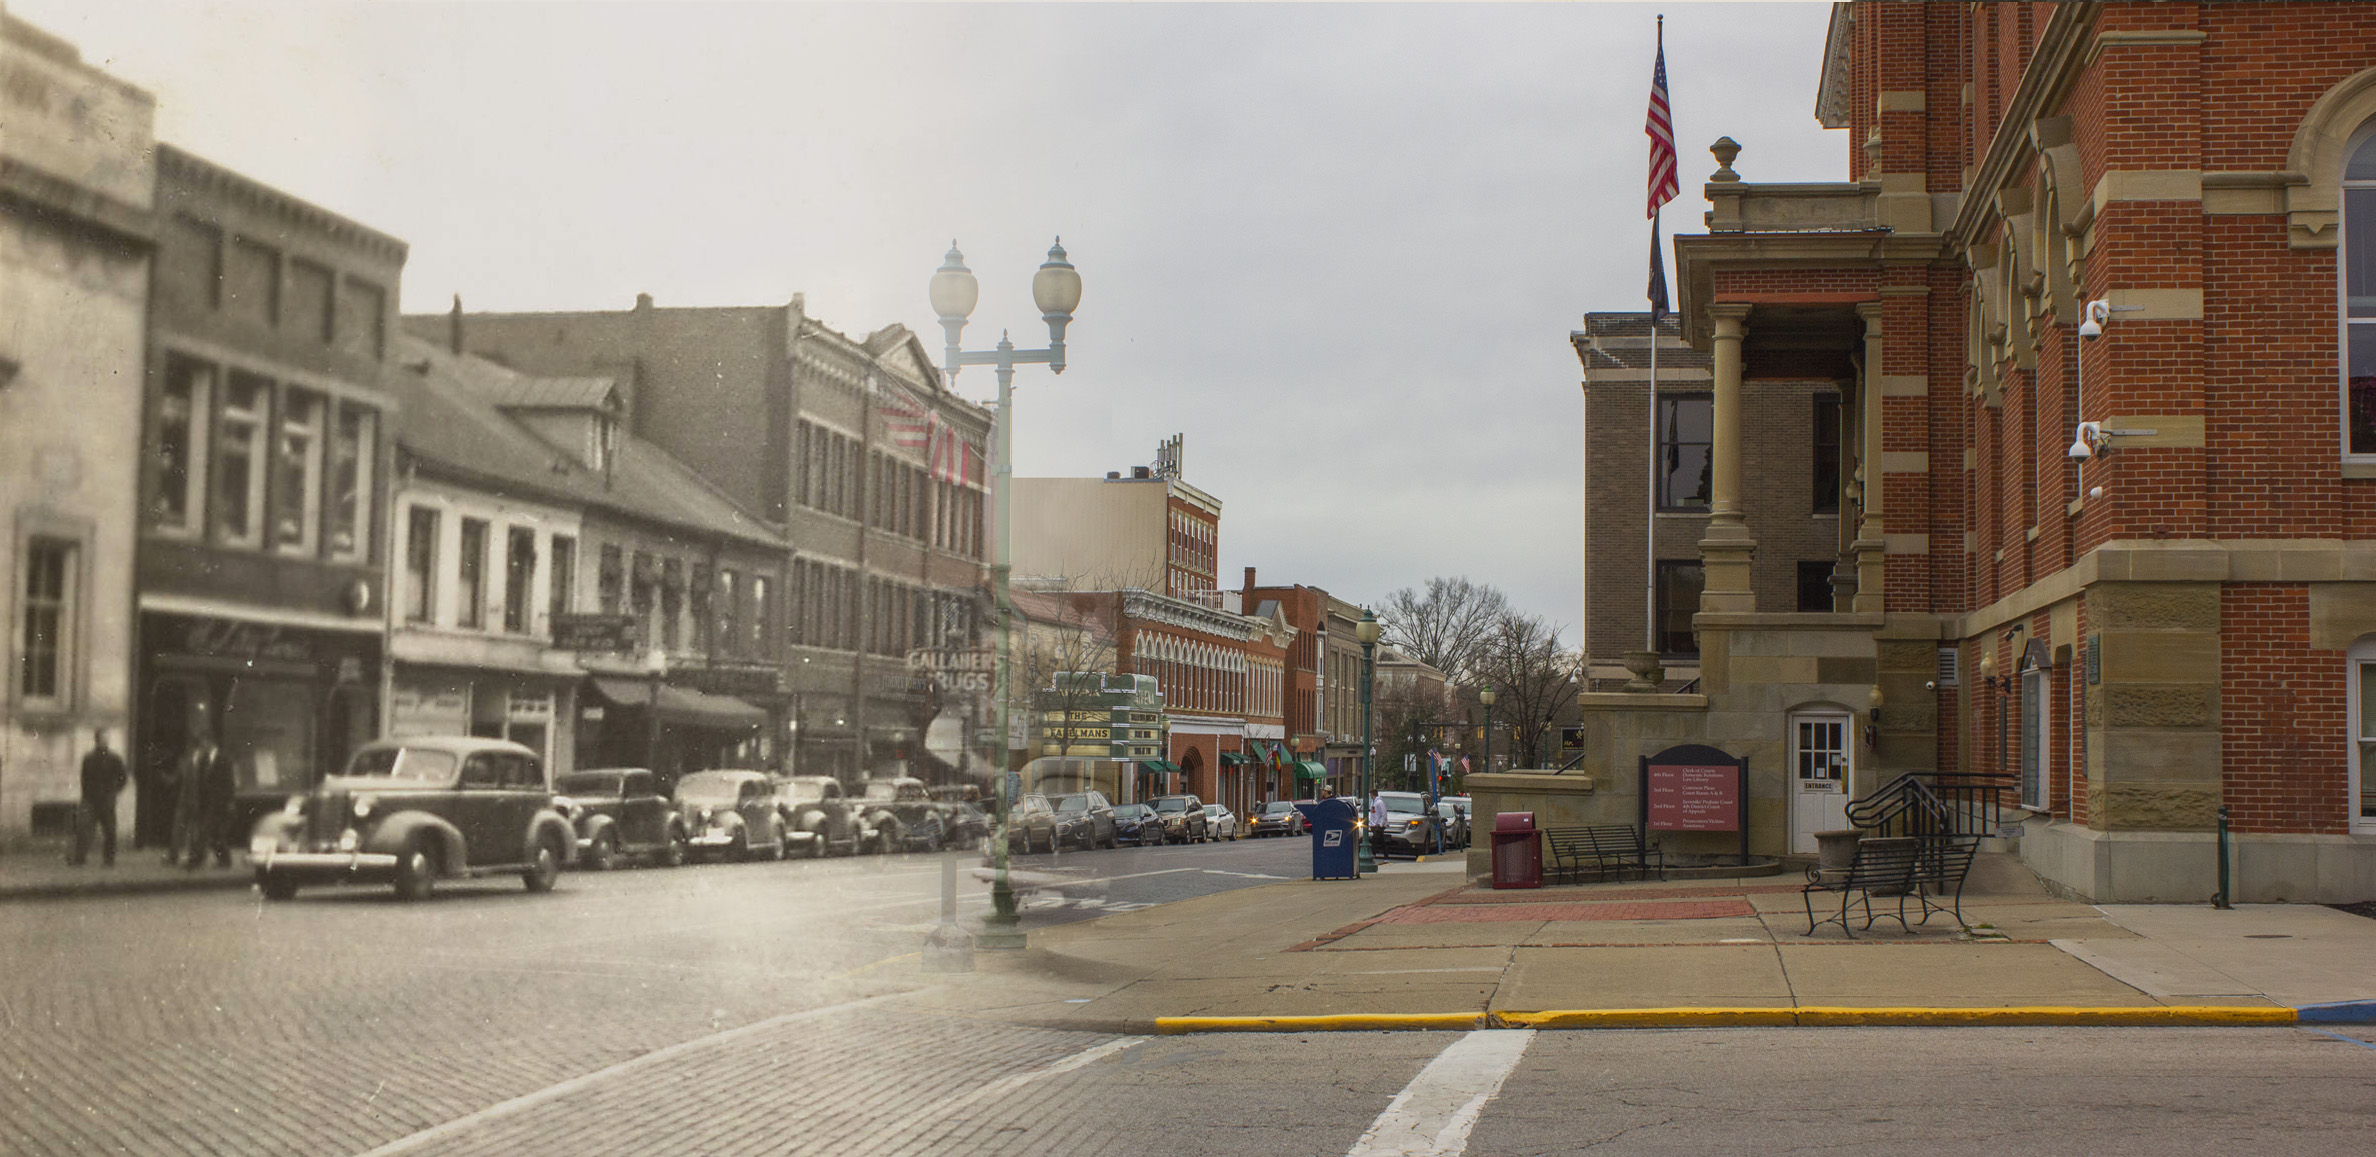 An image from the W.E. Peters collection exhibit of a Court Street and Washington Street in Athens, Ohio